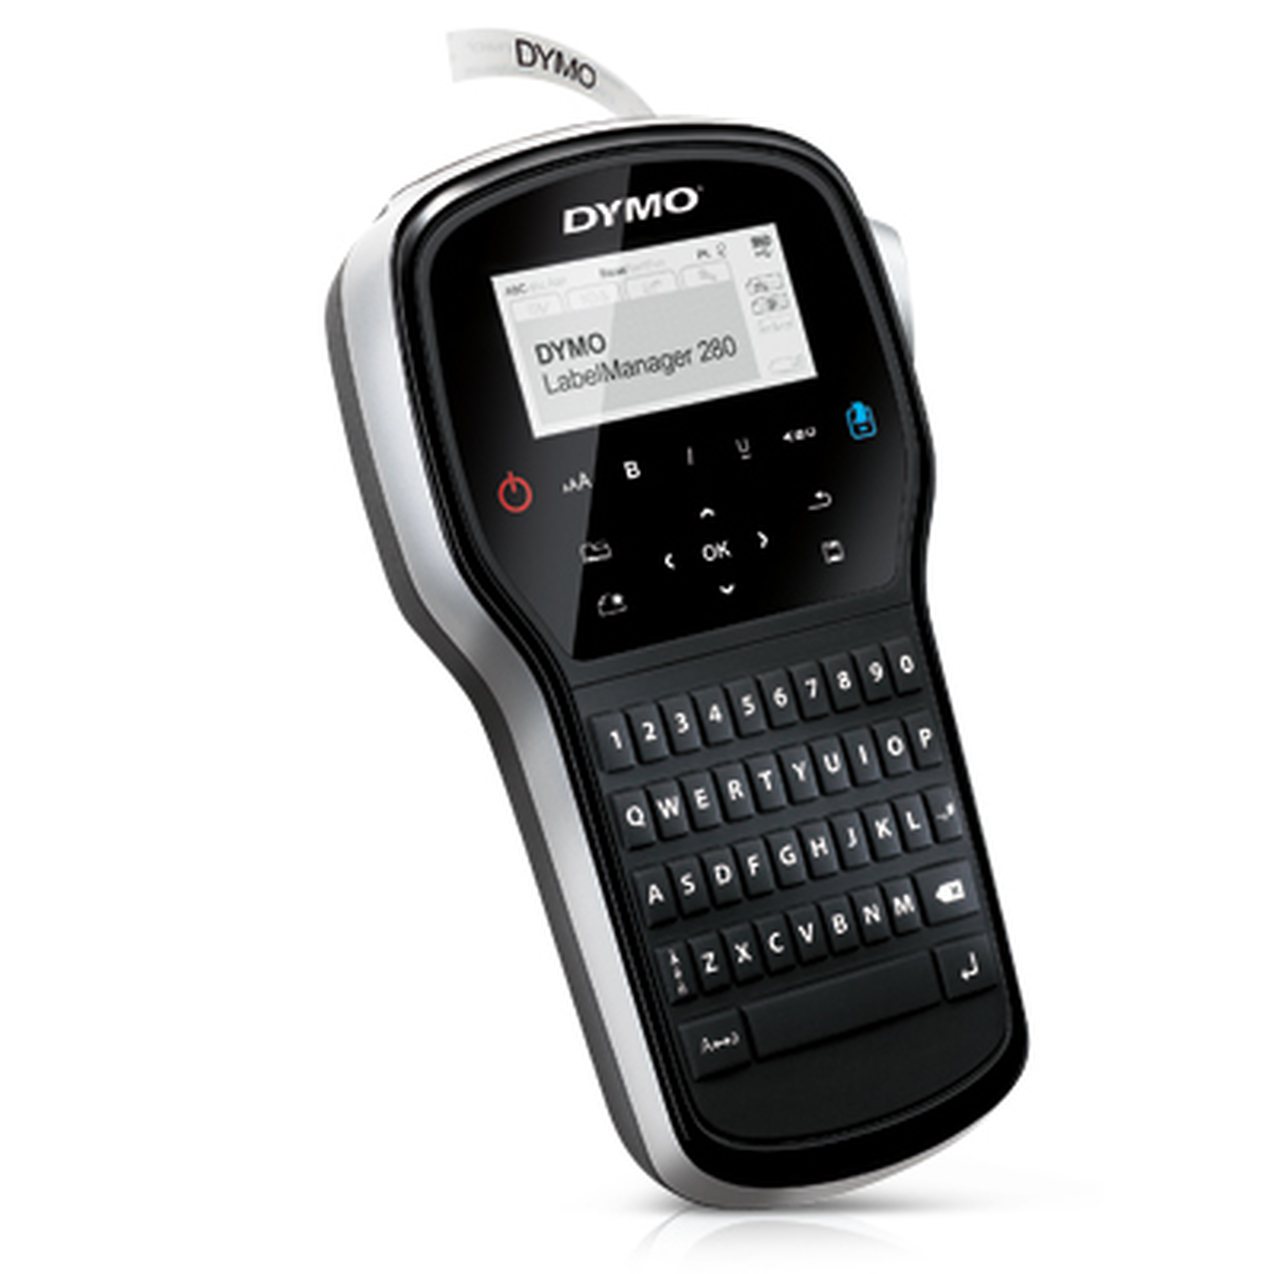 Dymo 0968980 labelmanager.